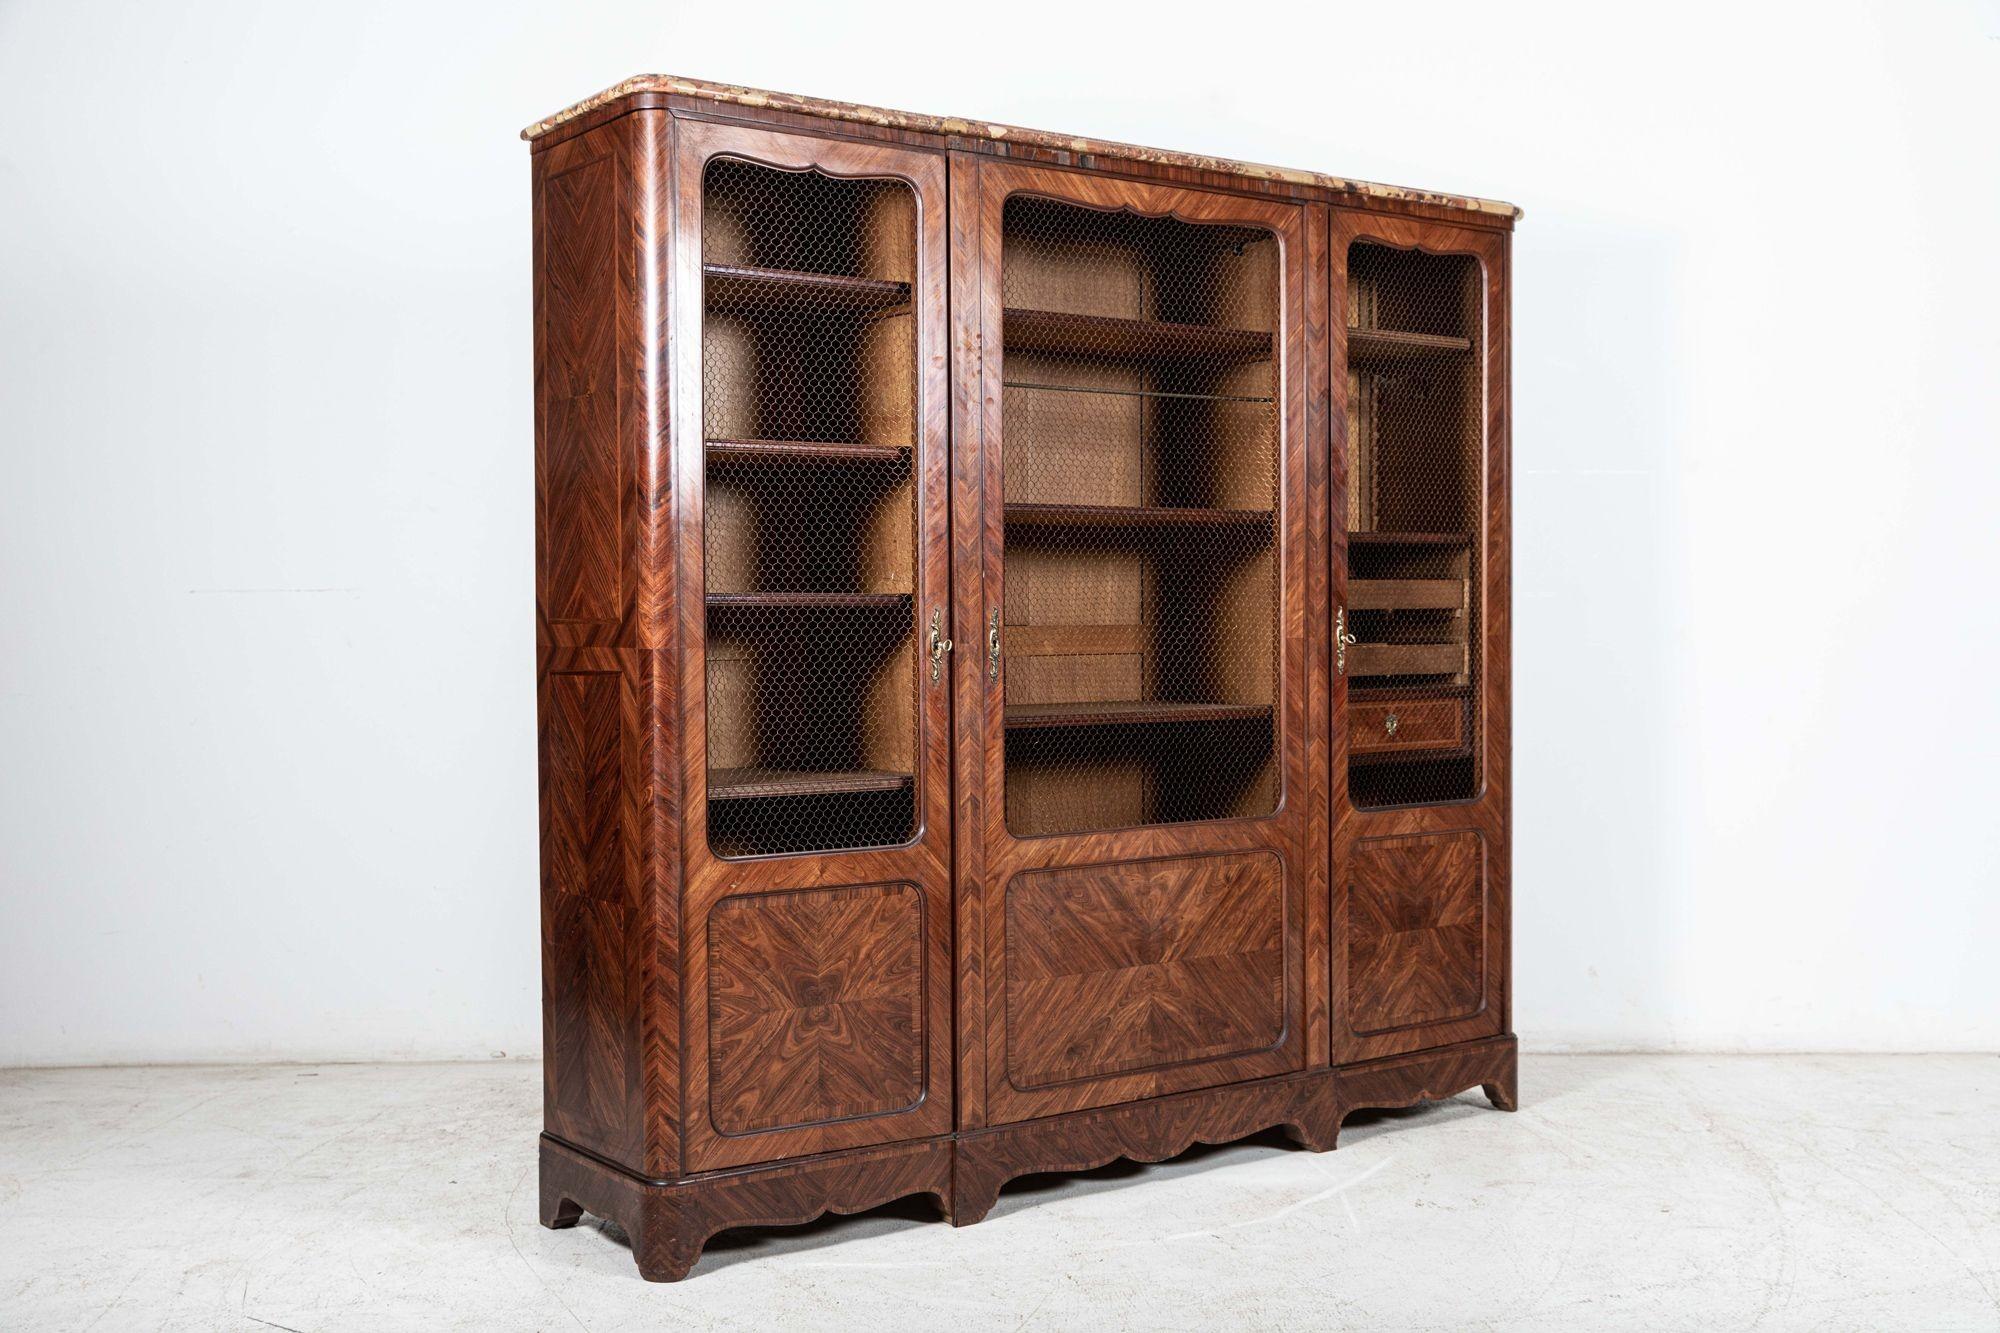 Circa 1890

19th C French walnut armoire / bookcase with wired grill doors and book matched walnut veneer with marble top.

Sourced from the South of France

Measures: W188 x D40 x H174 cm.

 